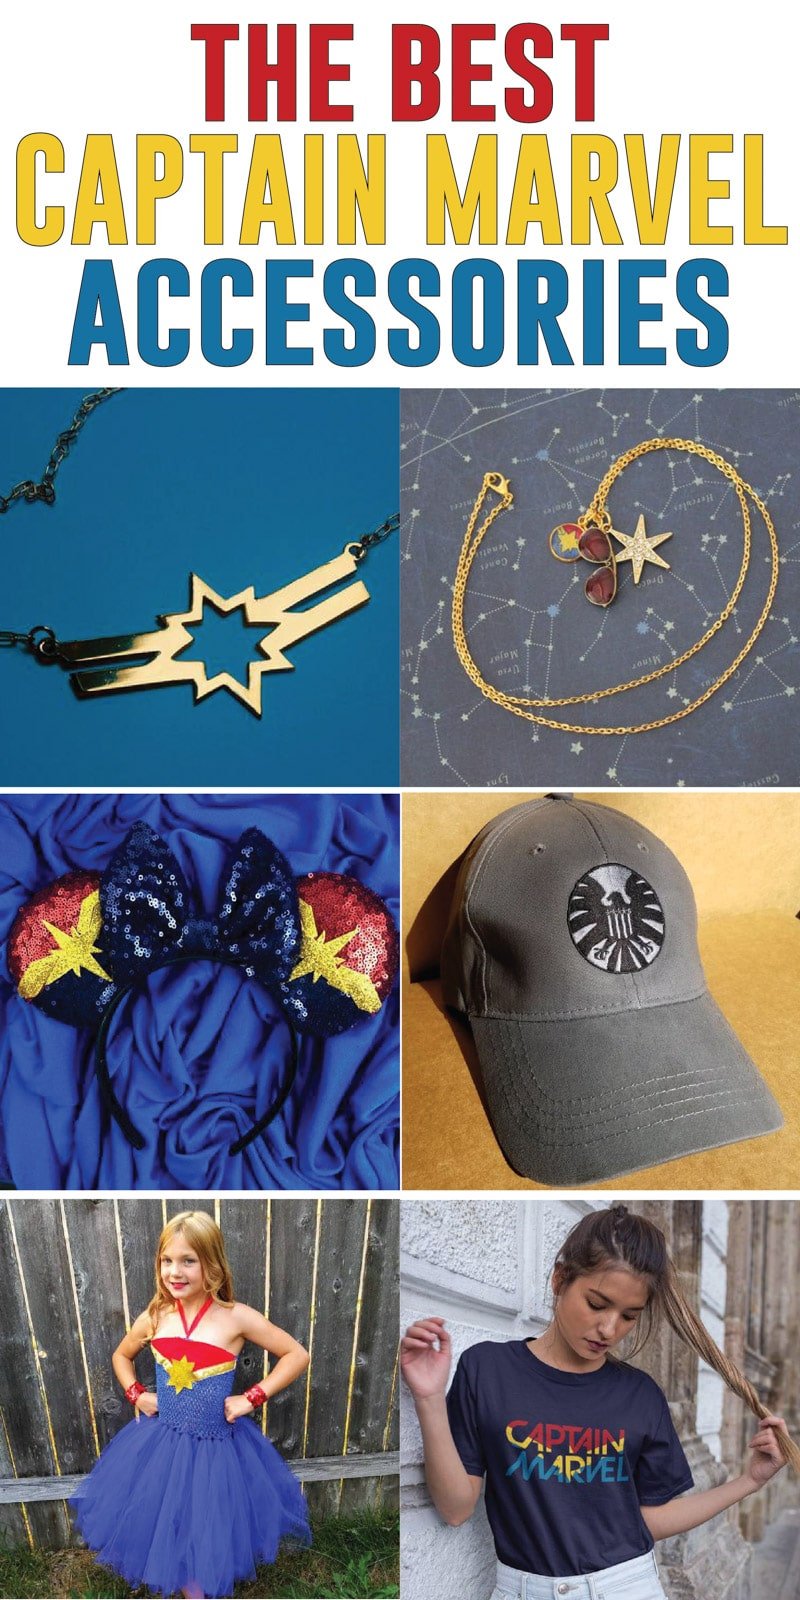 The best Captain Marvel costume ideas inspired by the brand new 2019 movie! Everything from cosplay options to a shirt featuring Brie Larson! Ideas for kids, adults, and even babies! And tons of great Captain Marvel shirt options too!